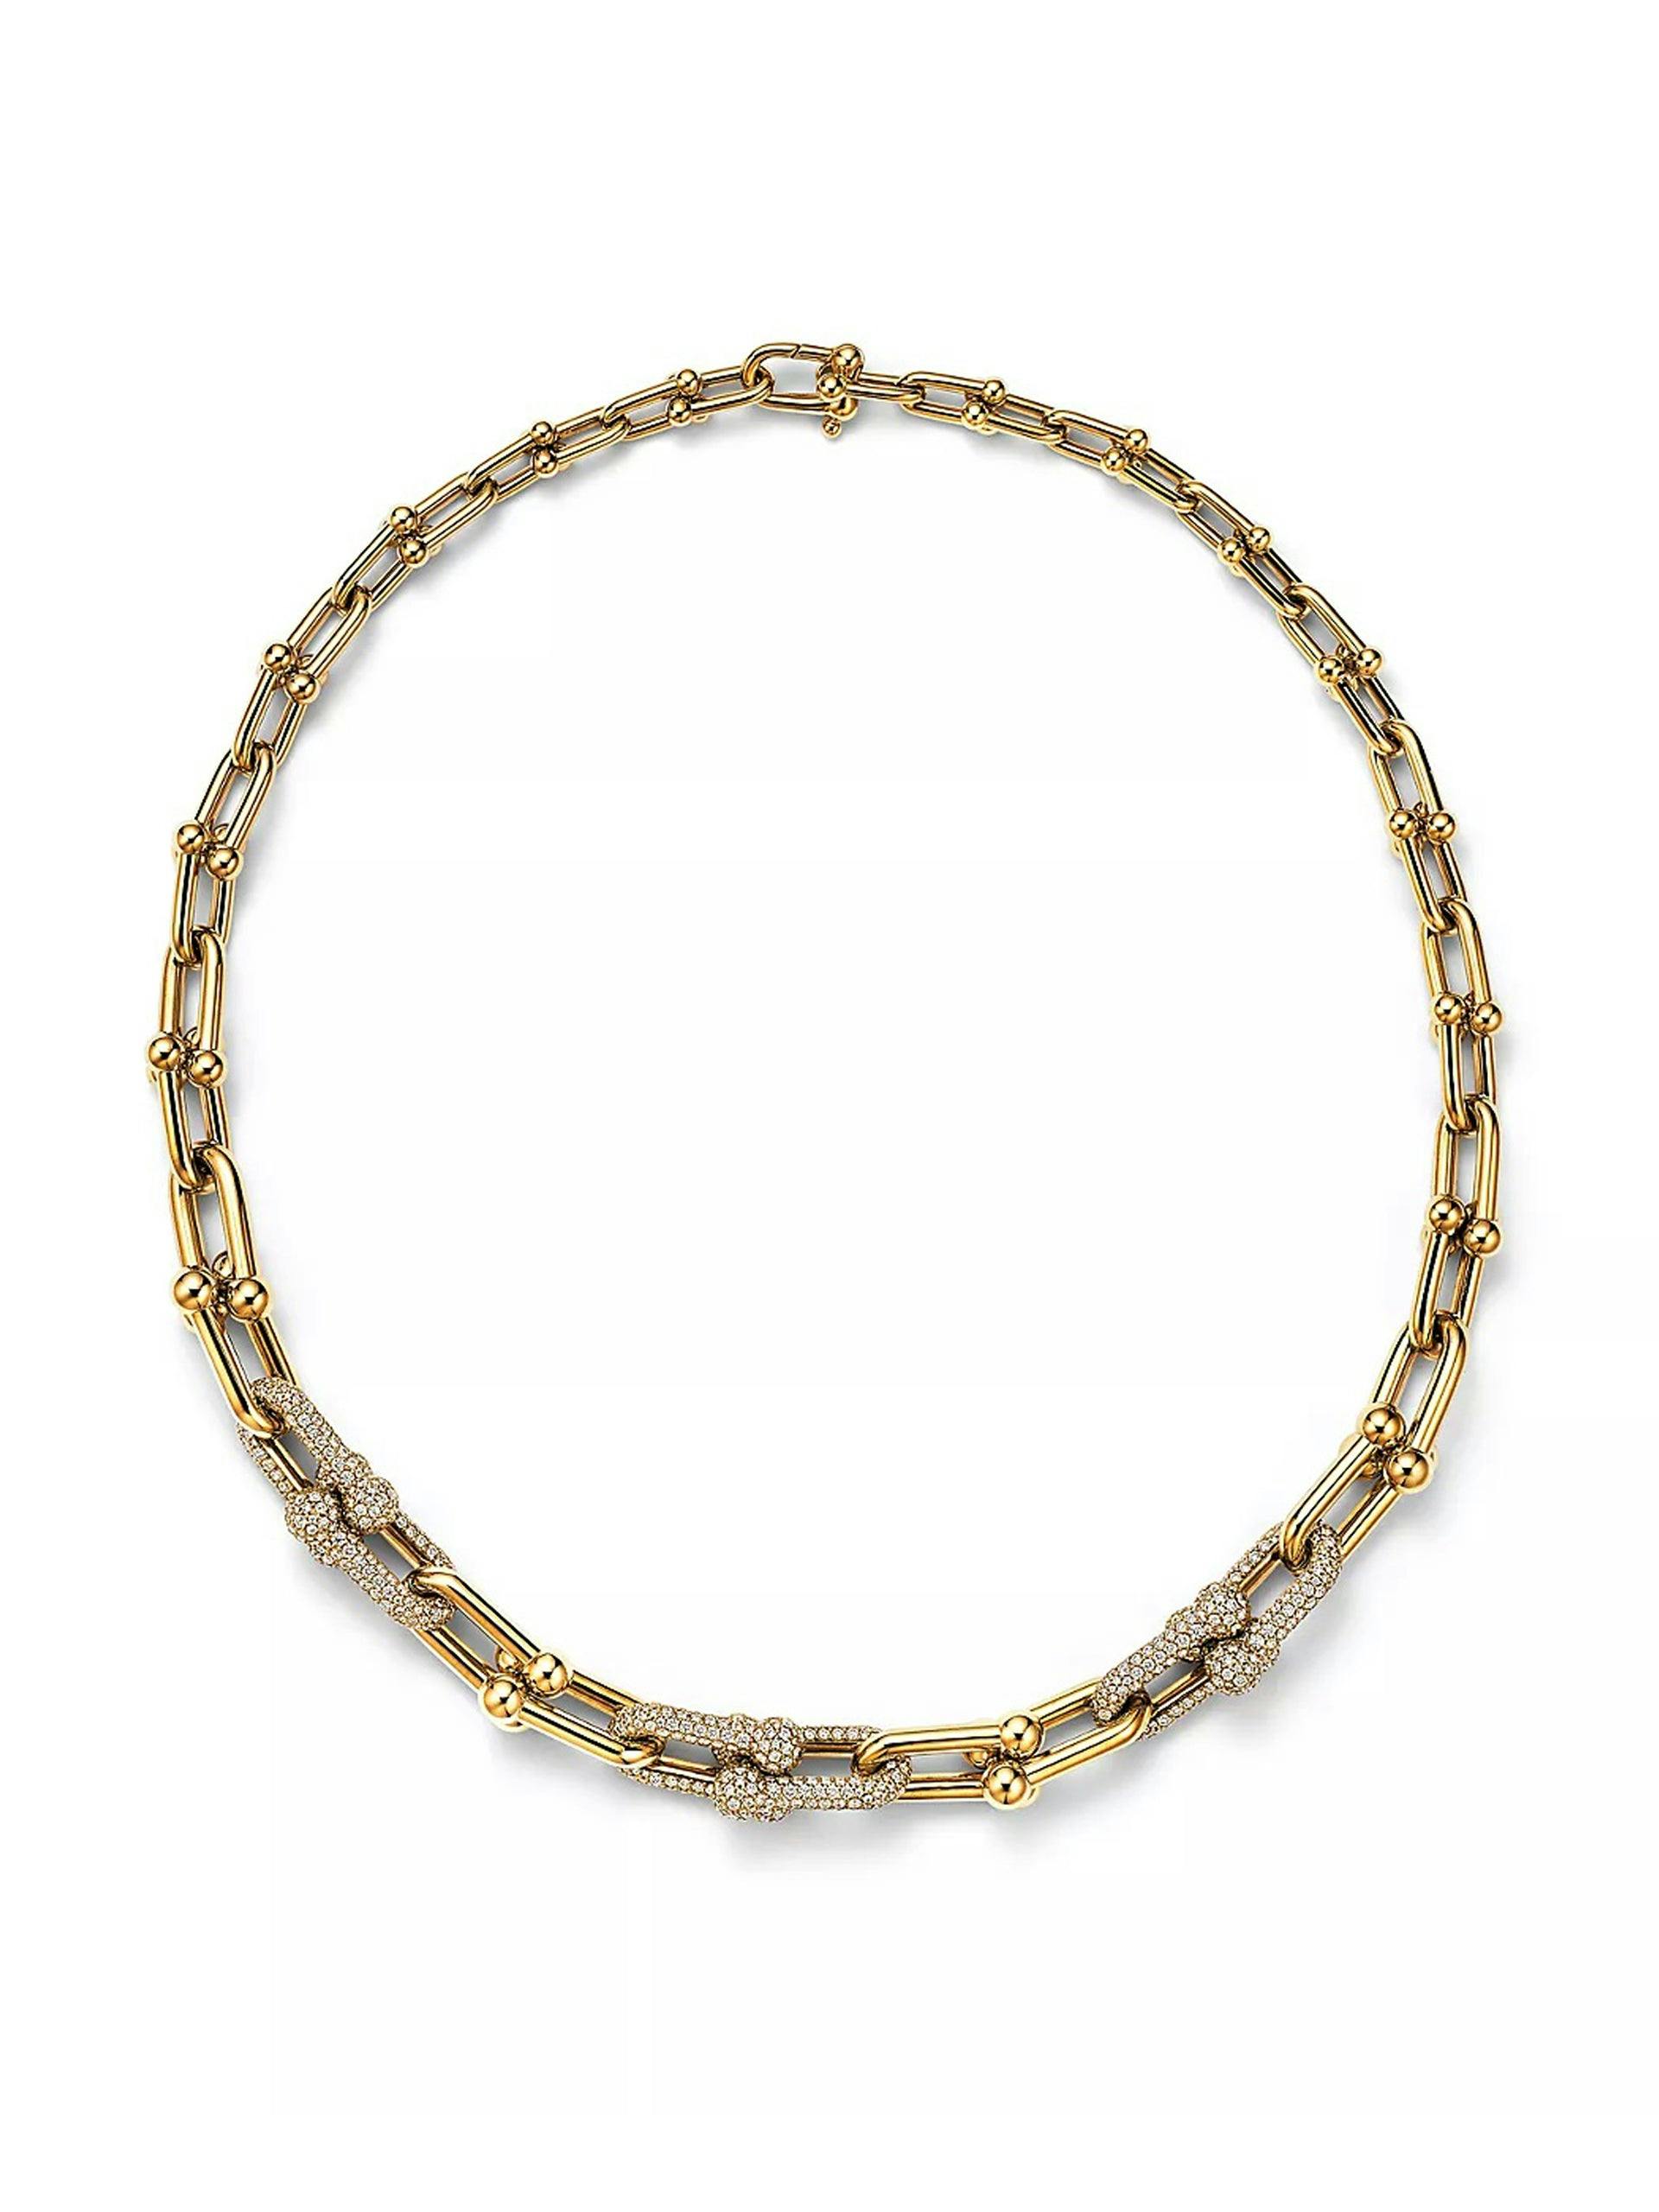 Gold graduated link necklace